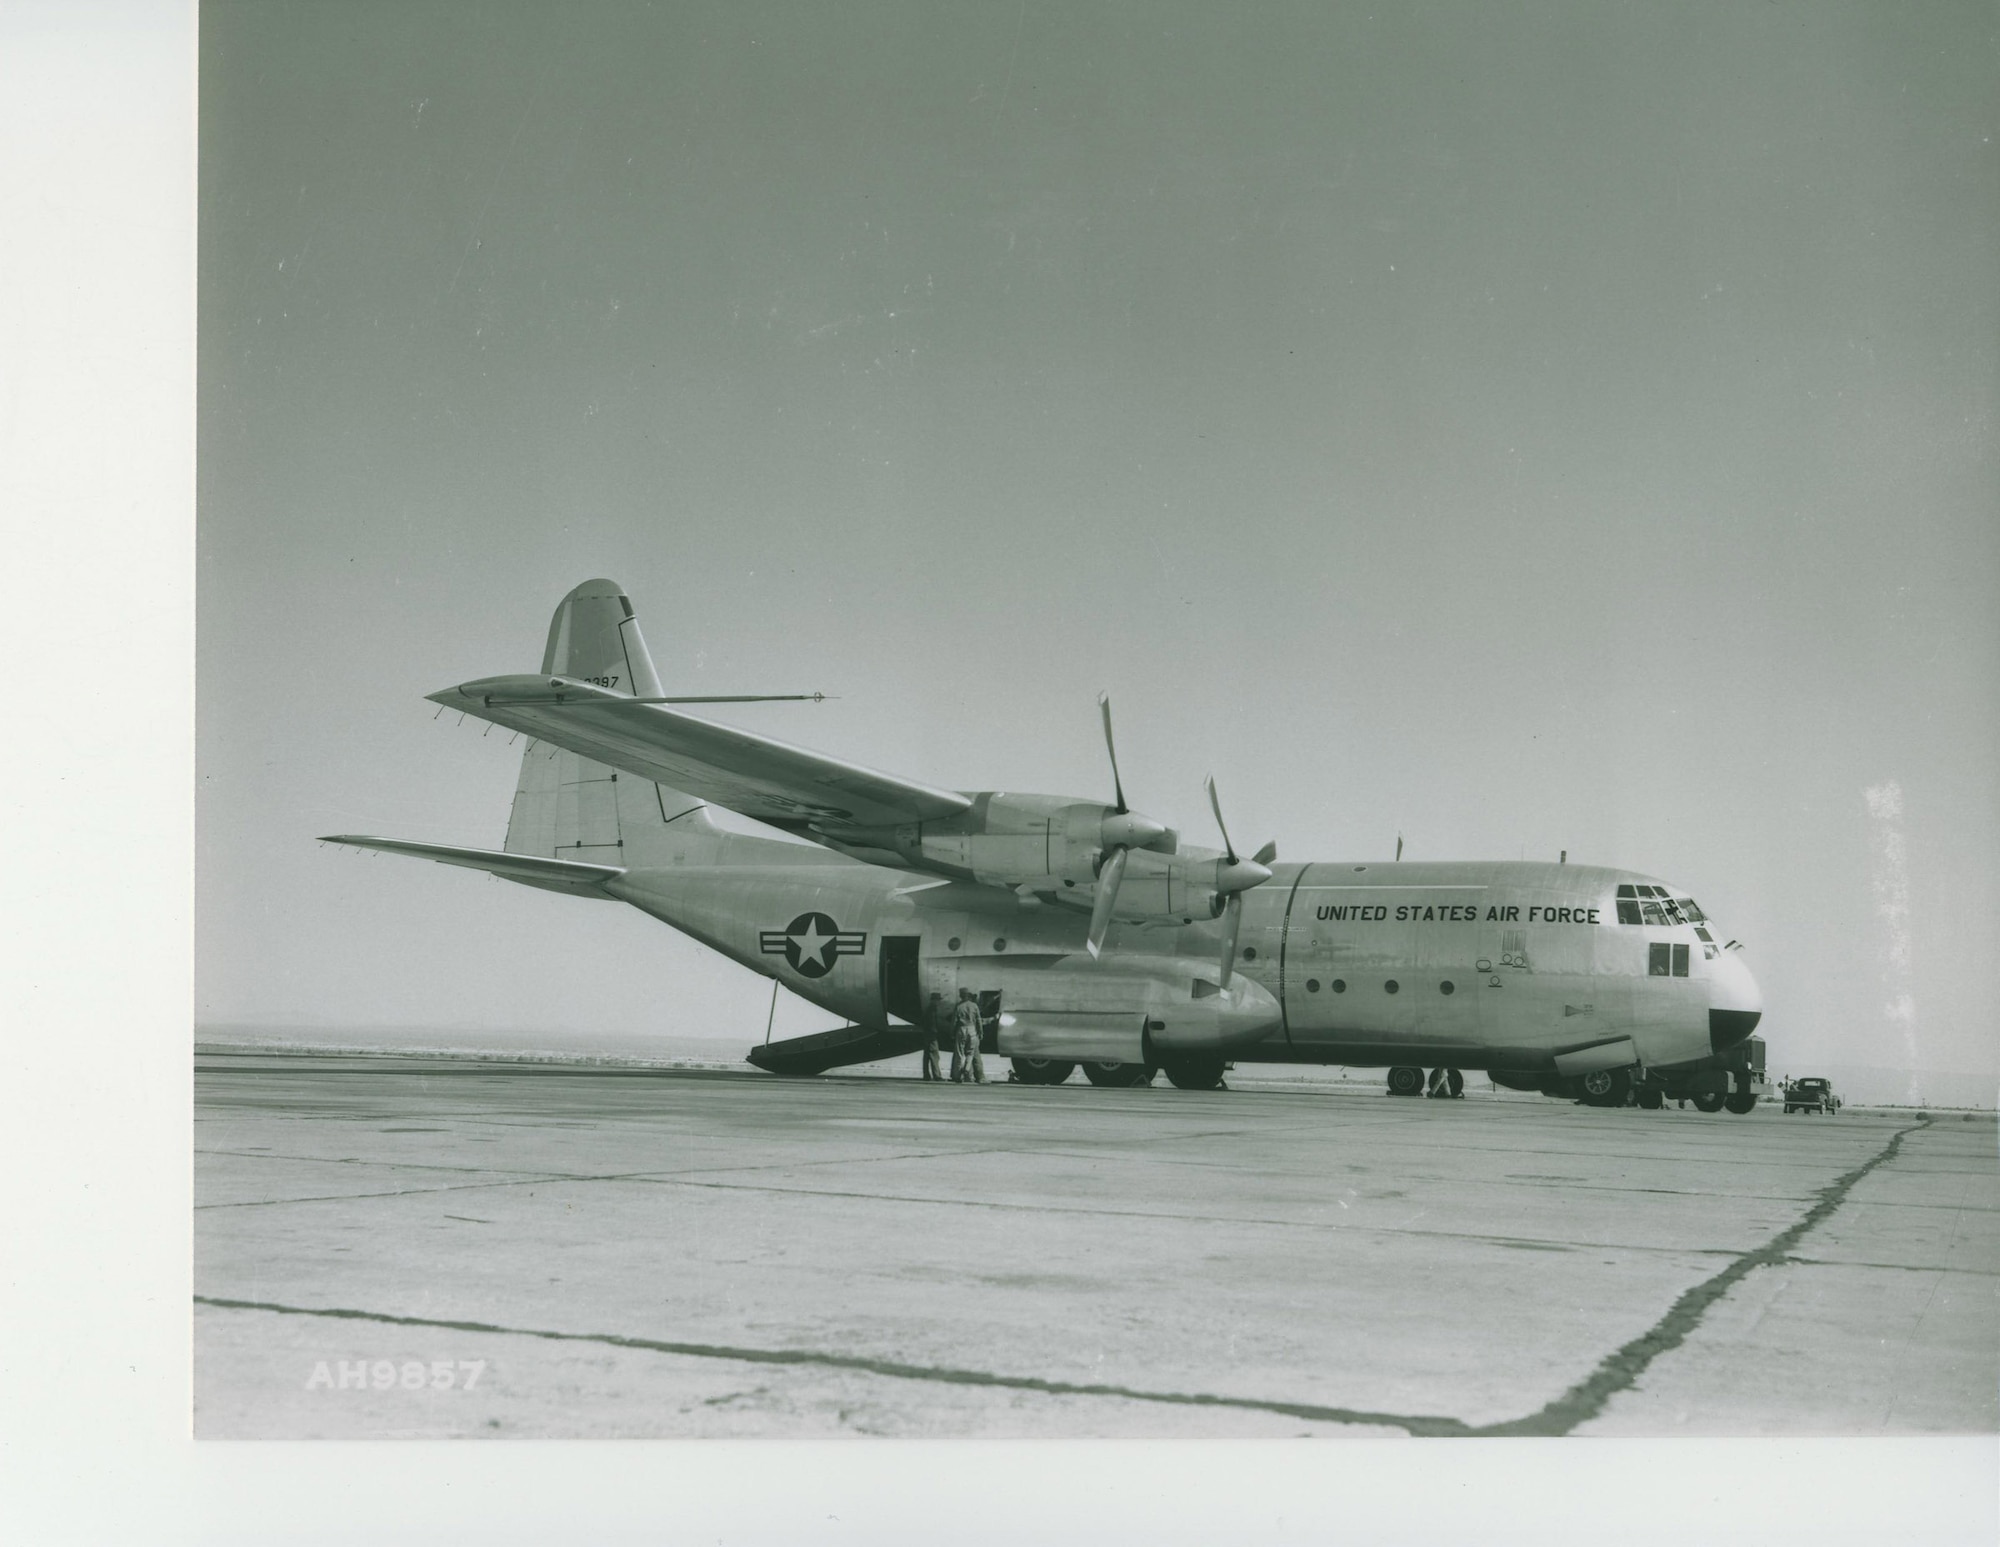 The YC-130, prototype for the classic transport aircraft, completed its first flight Aug. 23, 1954. (Courtesy photo)